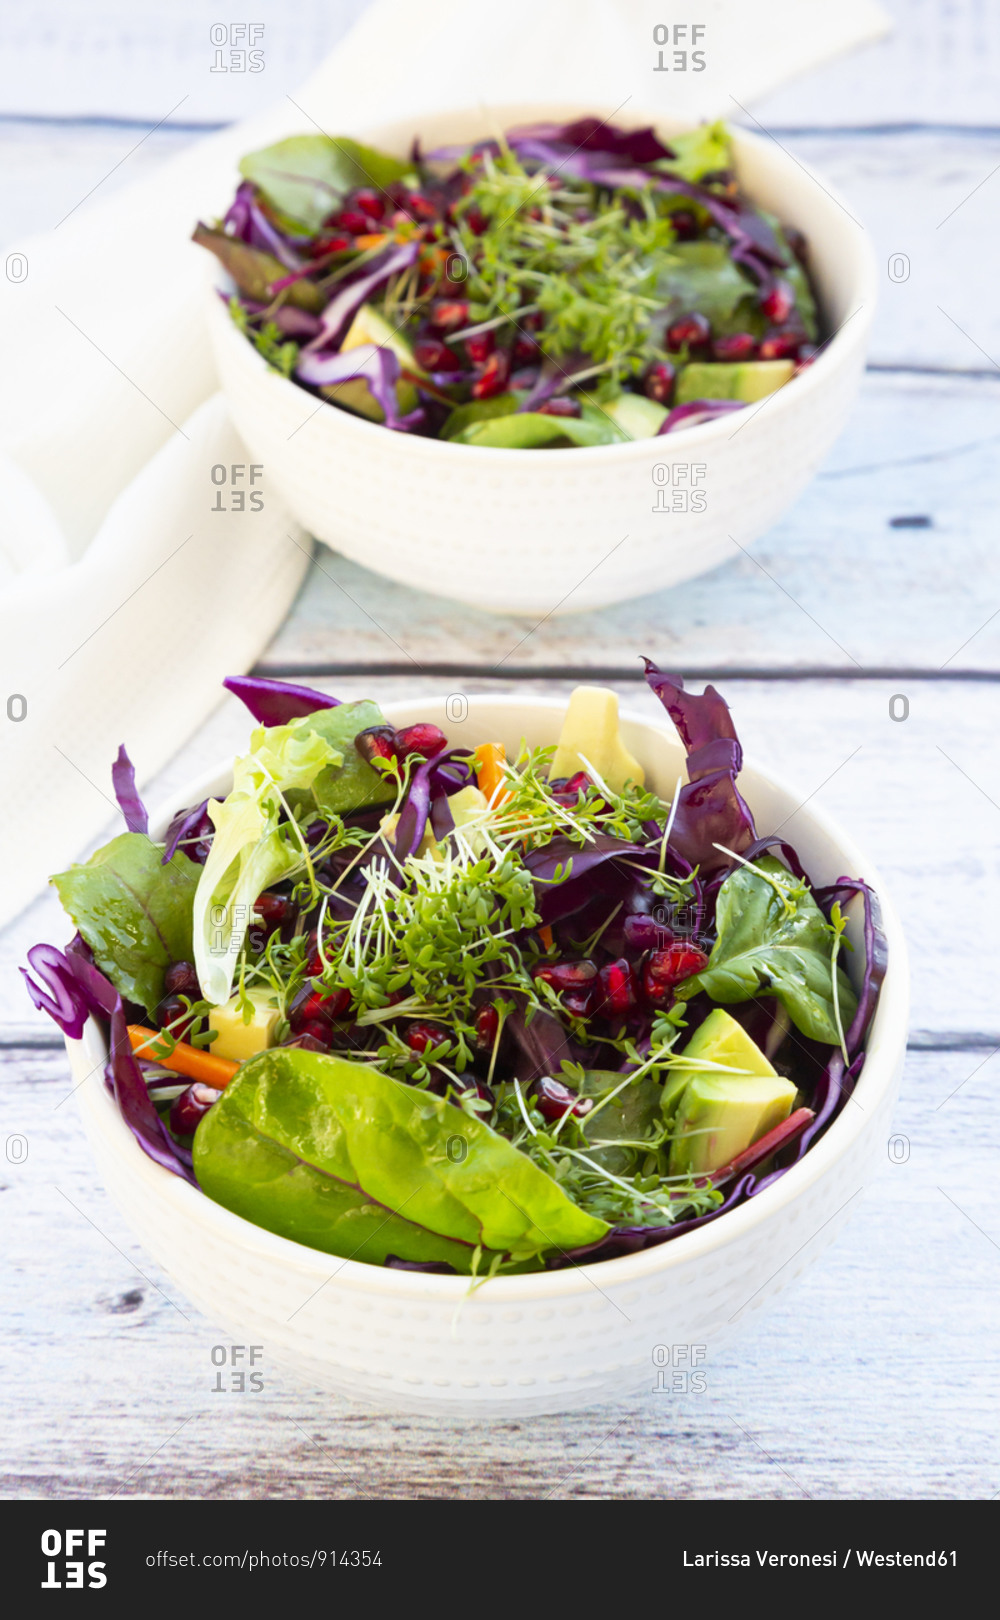 Two bowls of salad with red cabbage- carrots- lettuce leaves- avocado- pomegranate seeds and cress